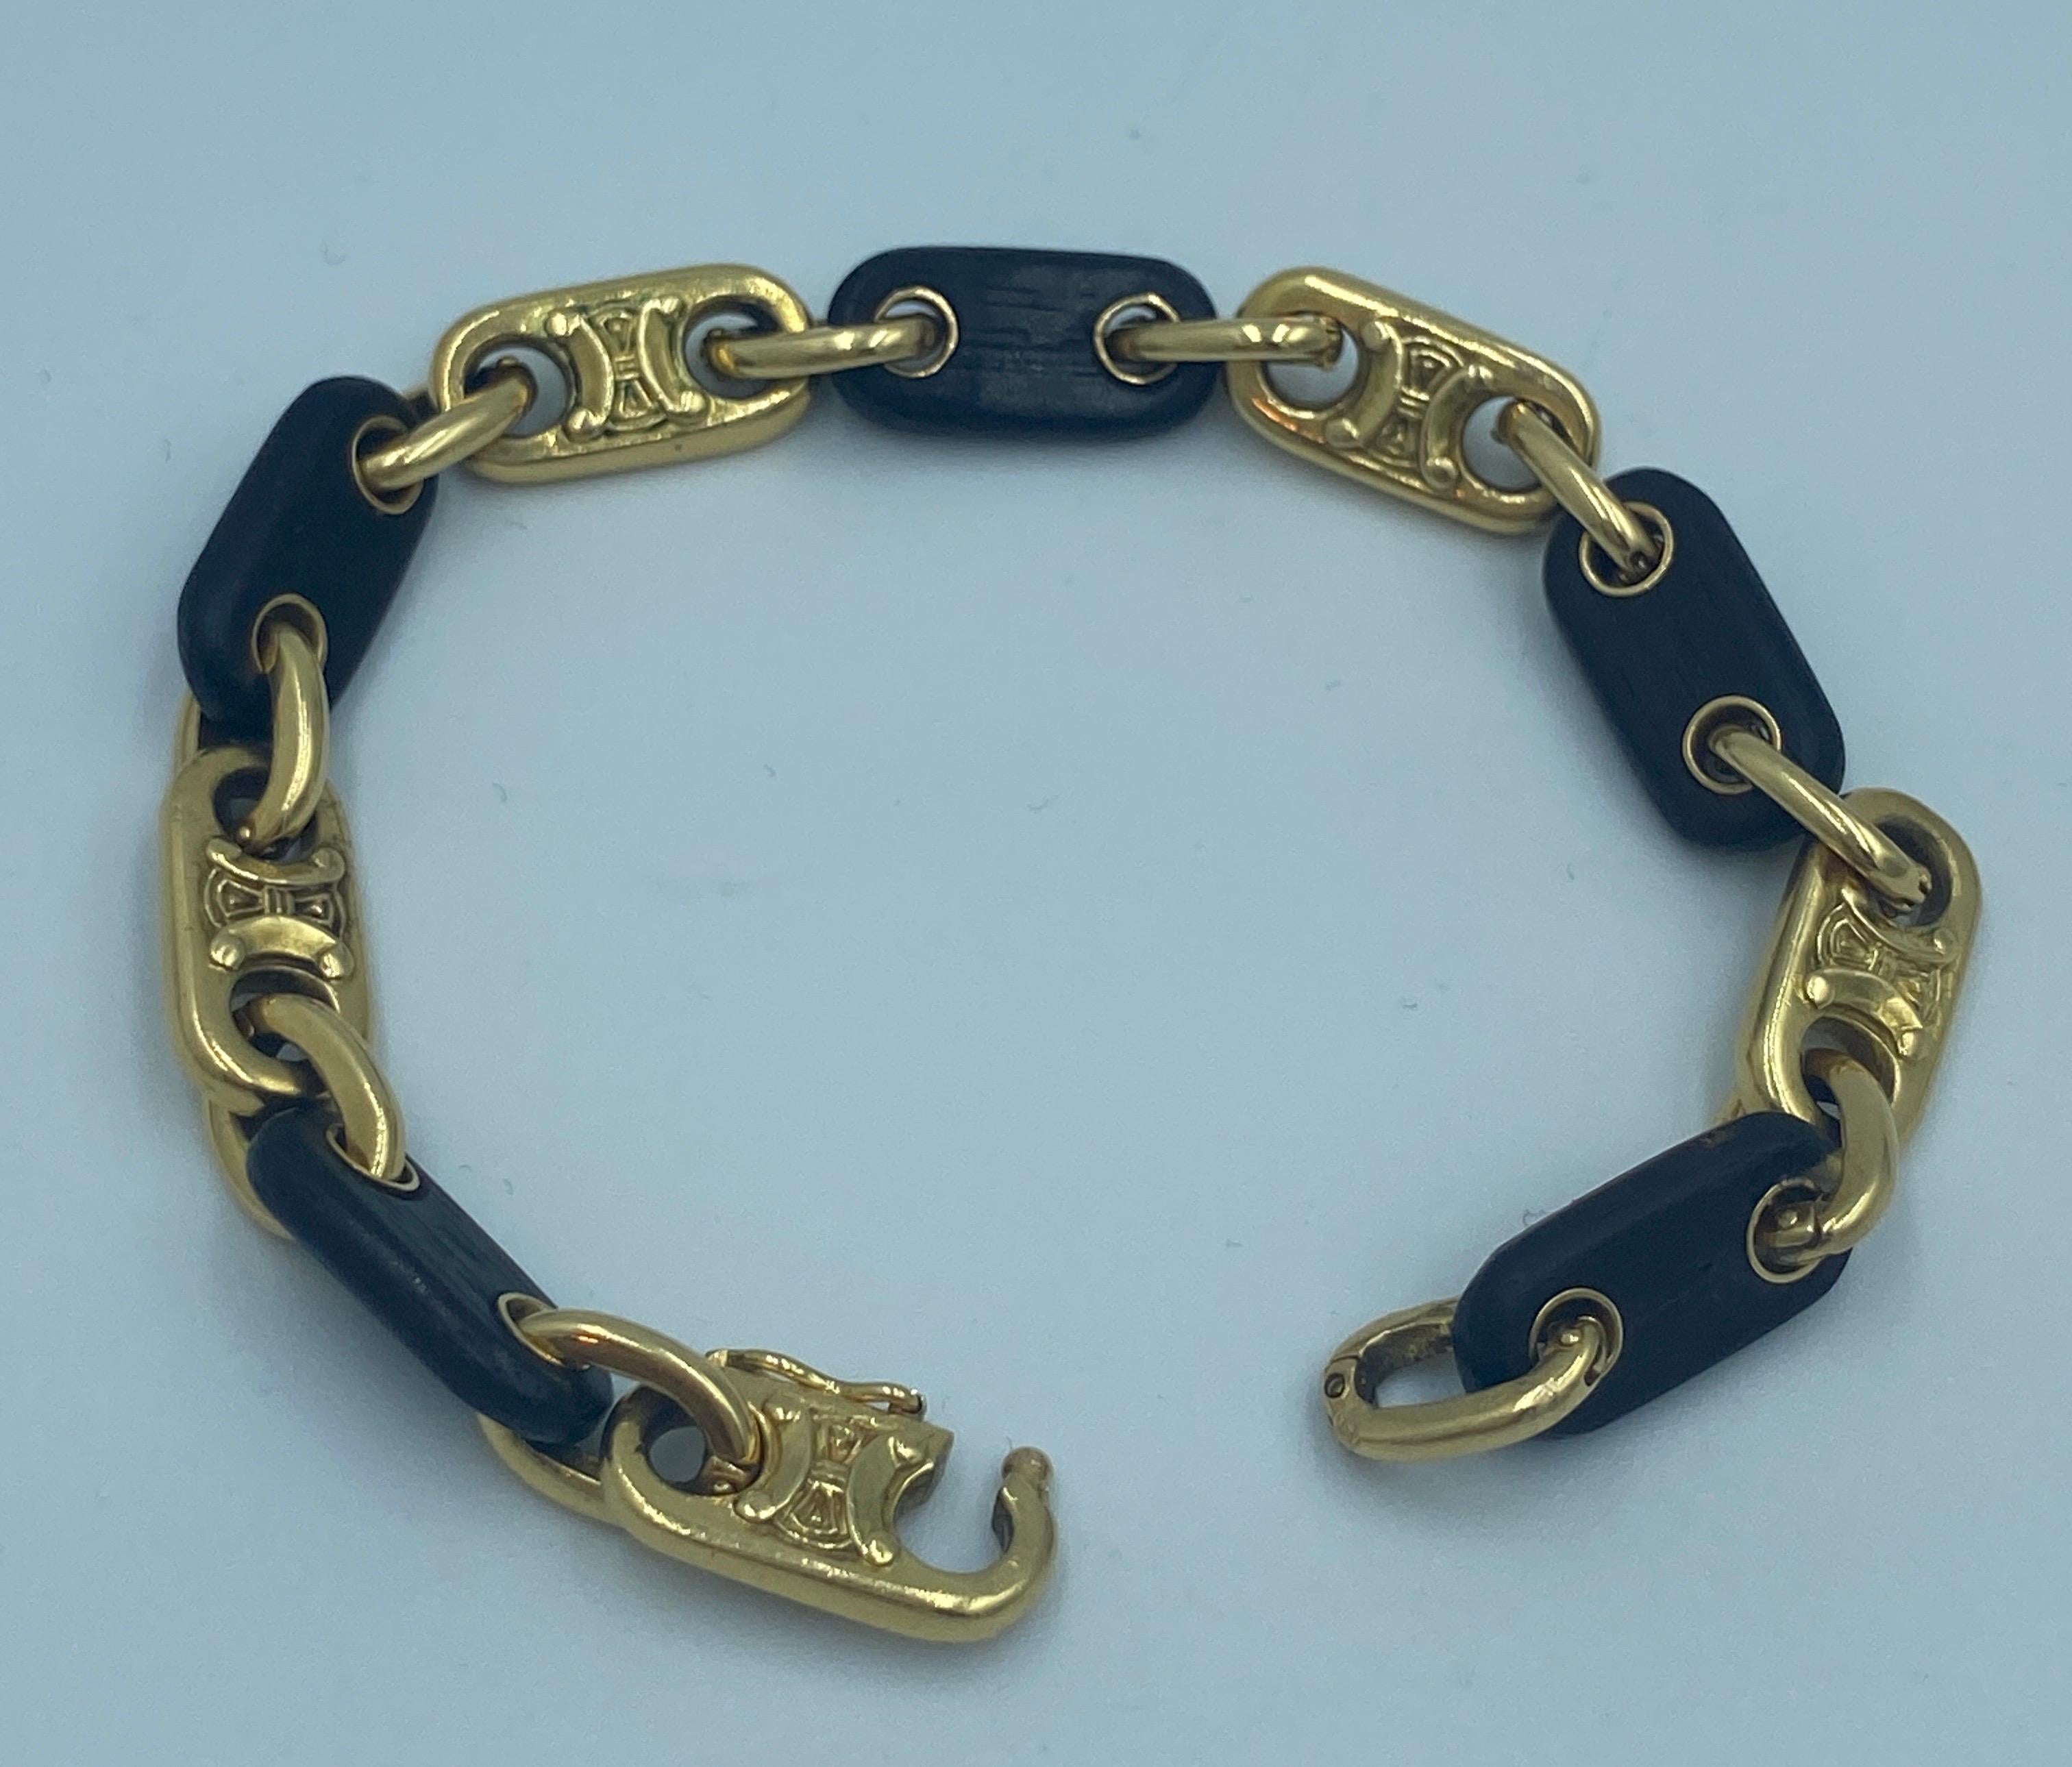 This bracelet made in 1970s by Celine is a highly wearable piece with interlocking 18k gold and ebony links. The set also has a necklace which is listed separately on 1st Dibs. A photo of the necklace is included below.
